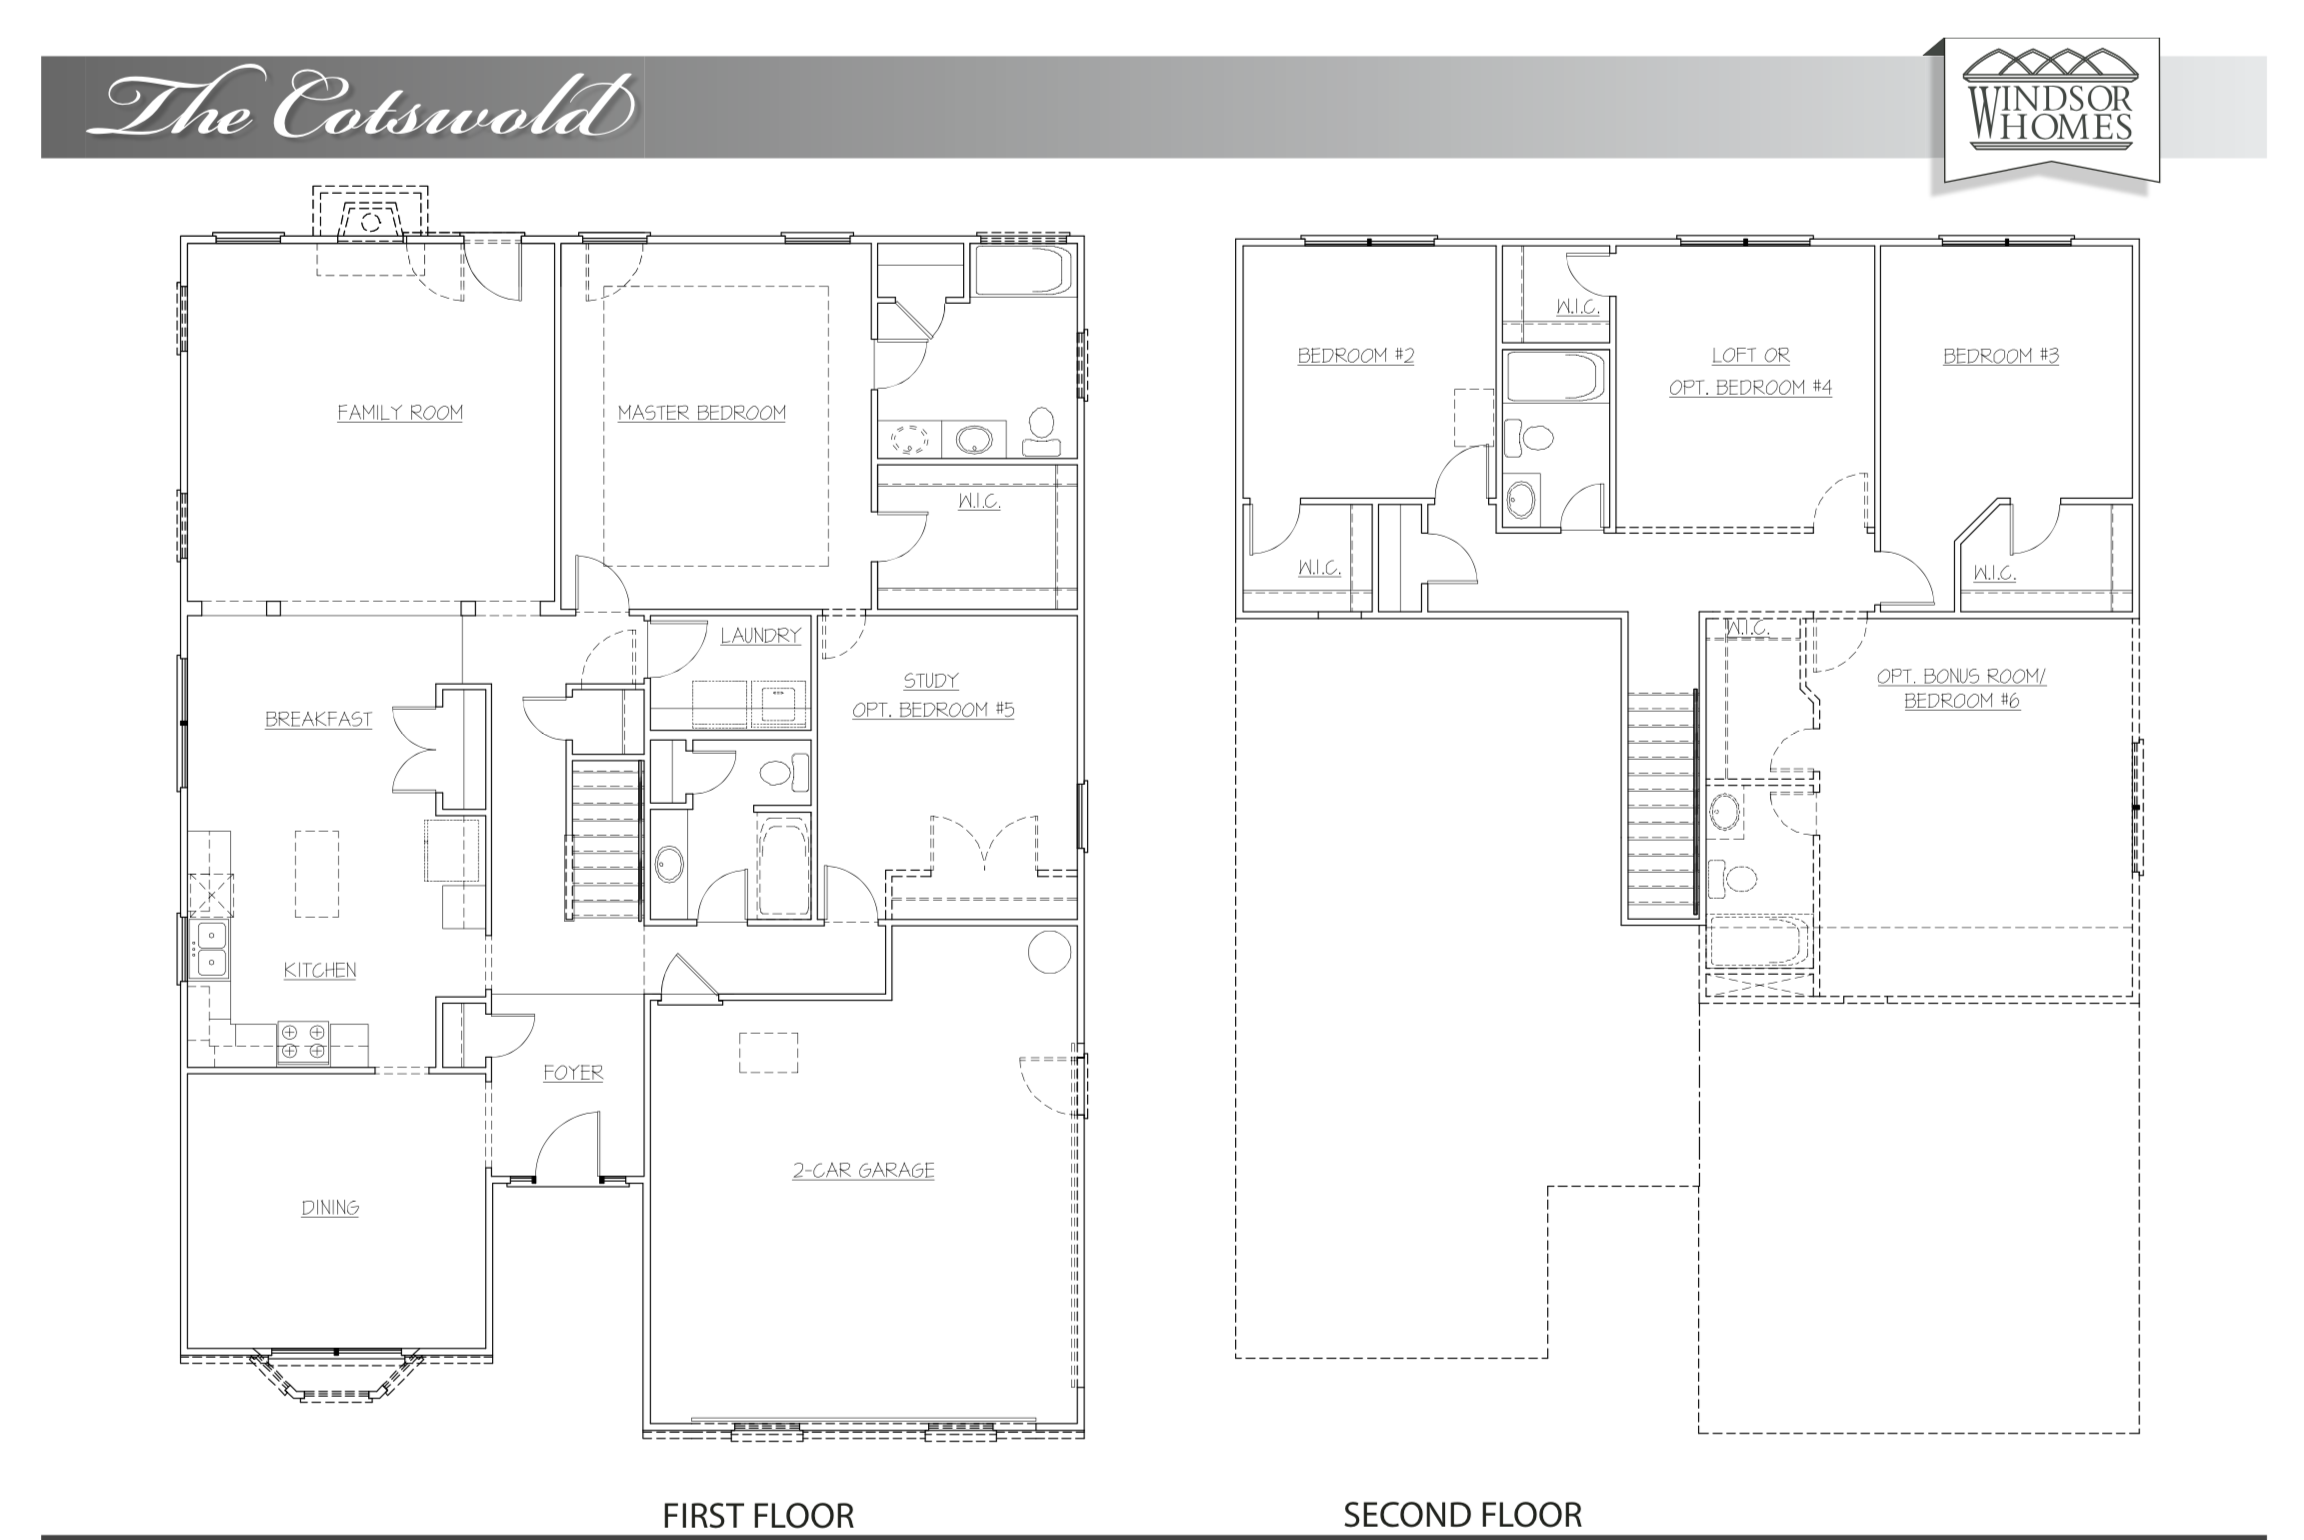 The Cotswold I floor plan image